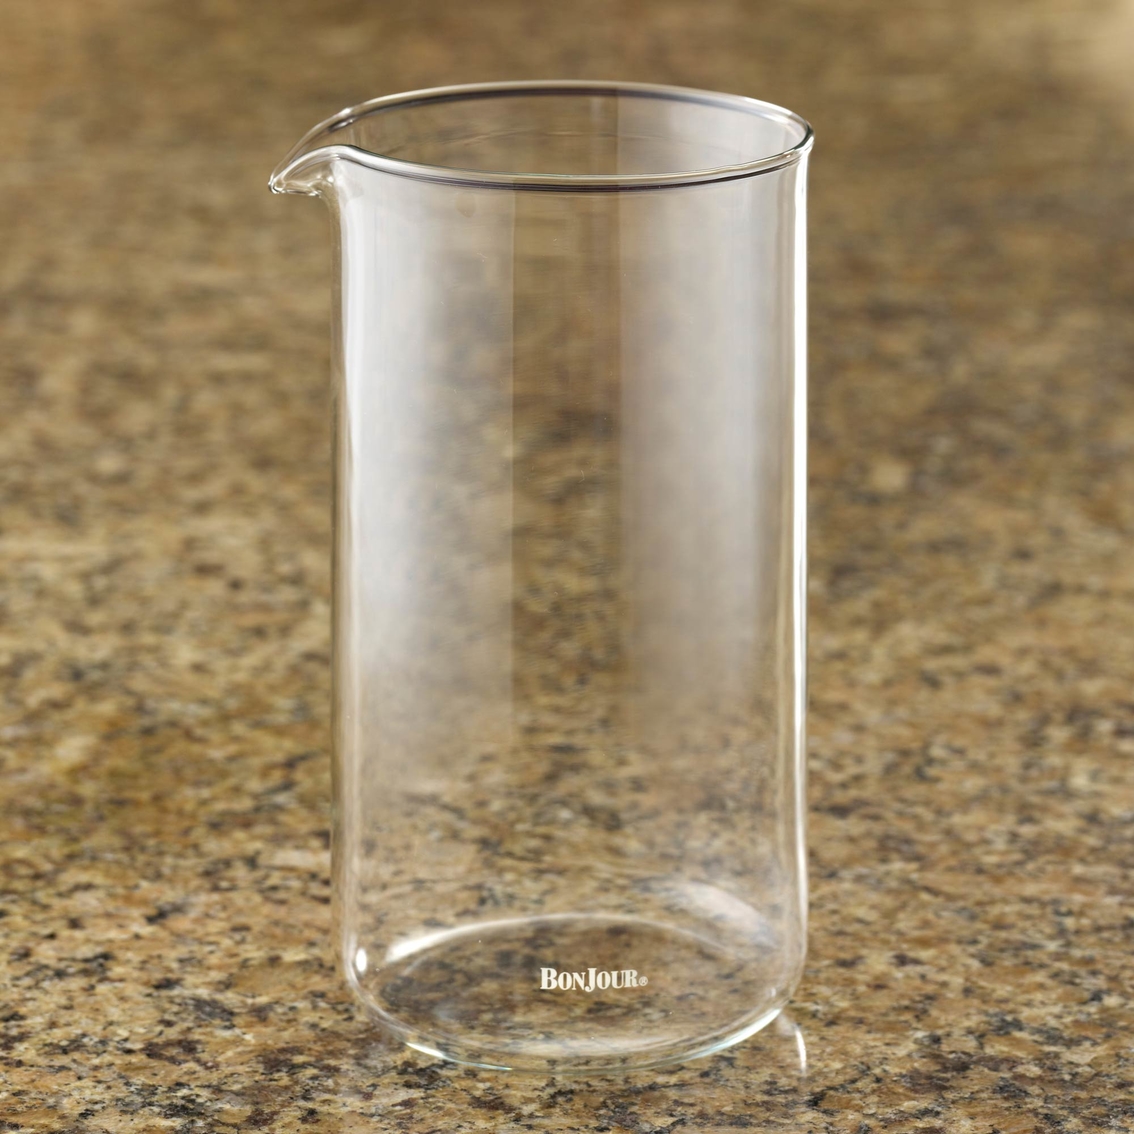 BonJour Coffee Universal French Press Replacement Glass Carafe - Image 2 of 2